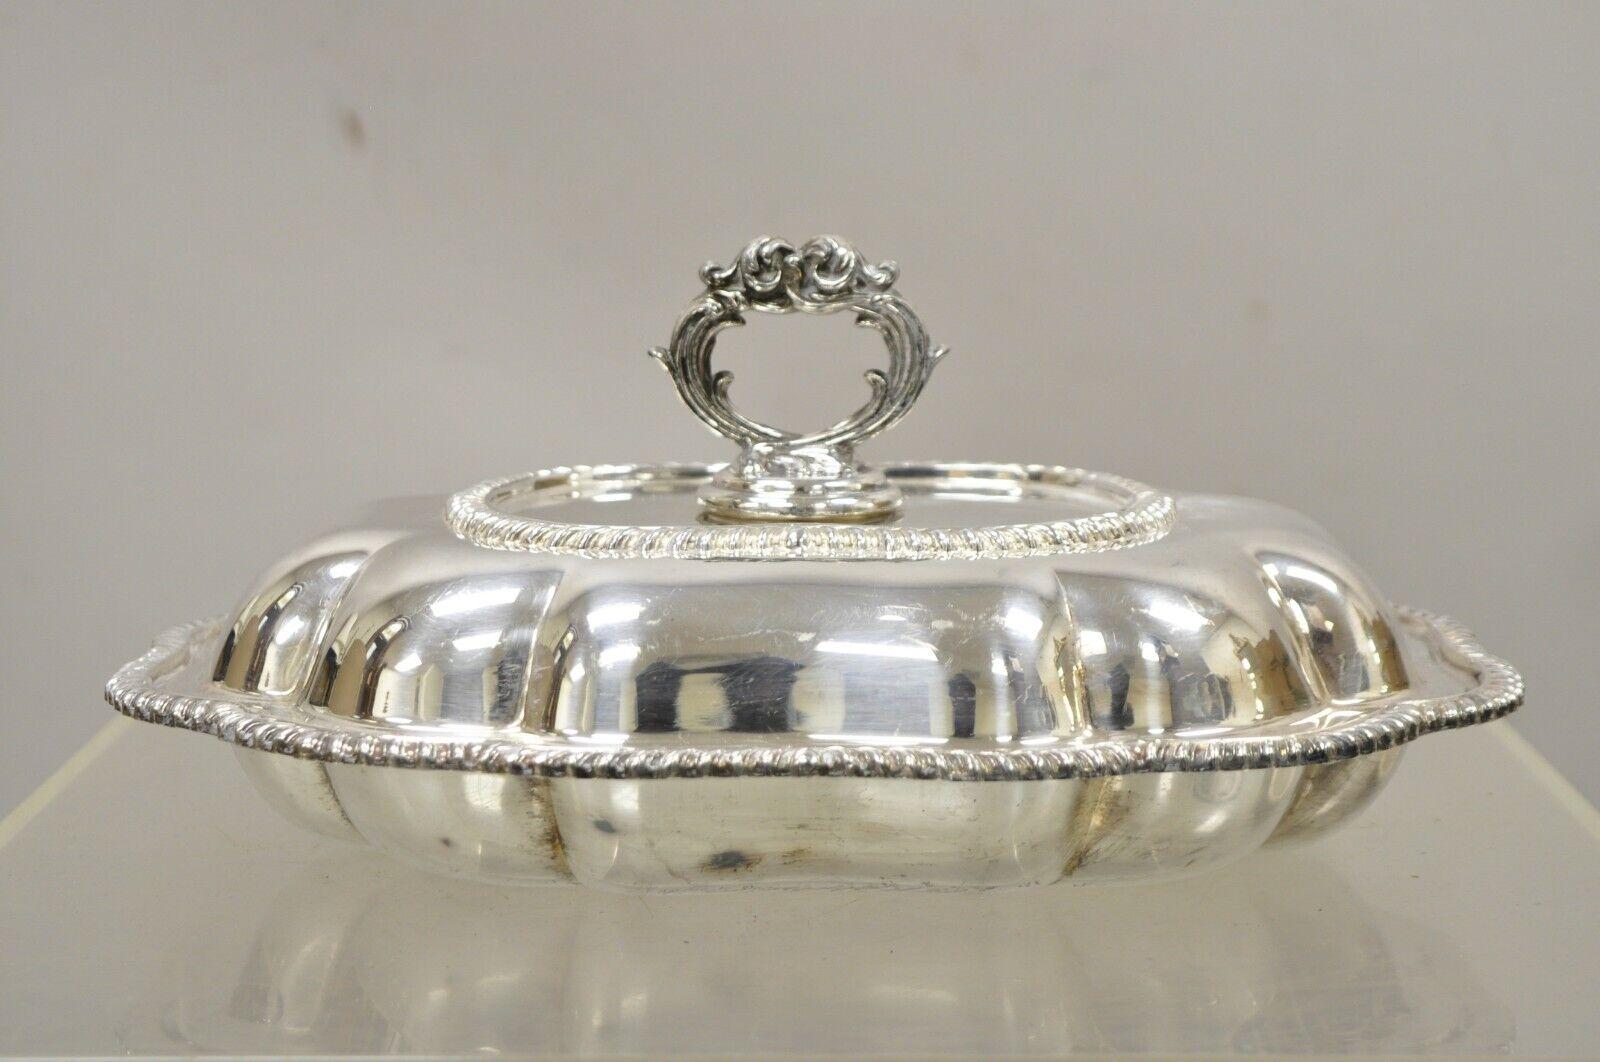 Vintage Regency Style silver plated covered vegetable dish serving platter. Item features ornate scalloped lid, ornate handle, very nice vintage item, quality craftsmanship, great style and form, circa early to mid-20th century. Measurements: 6